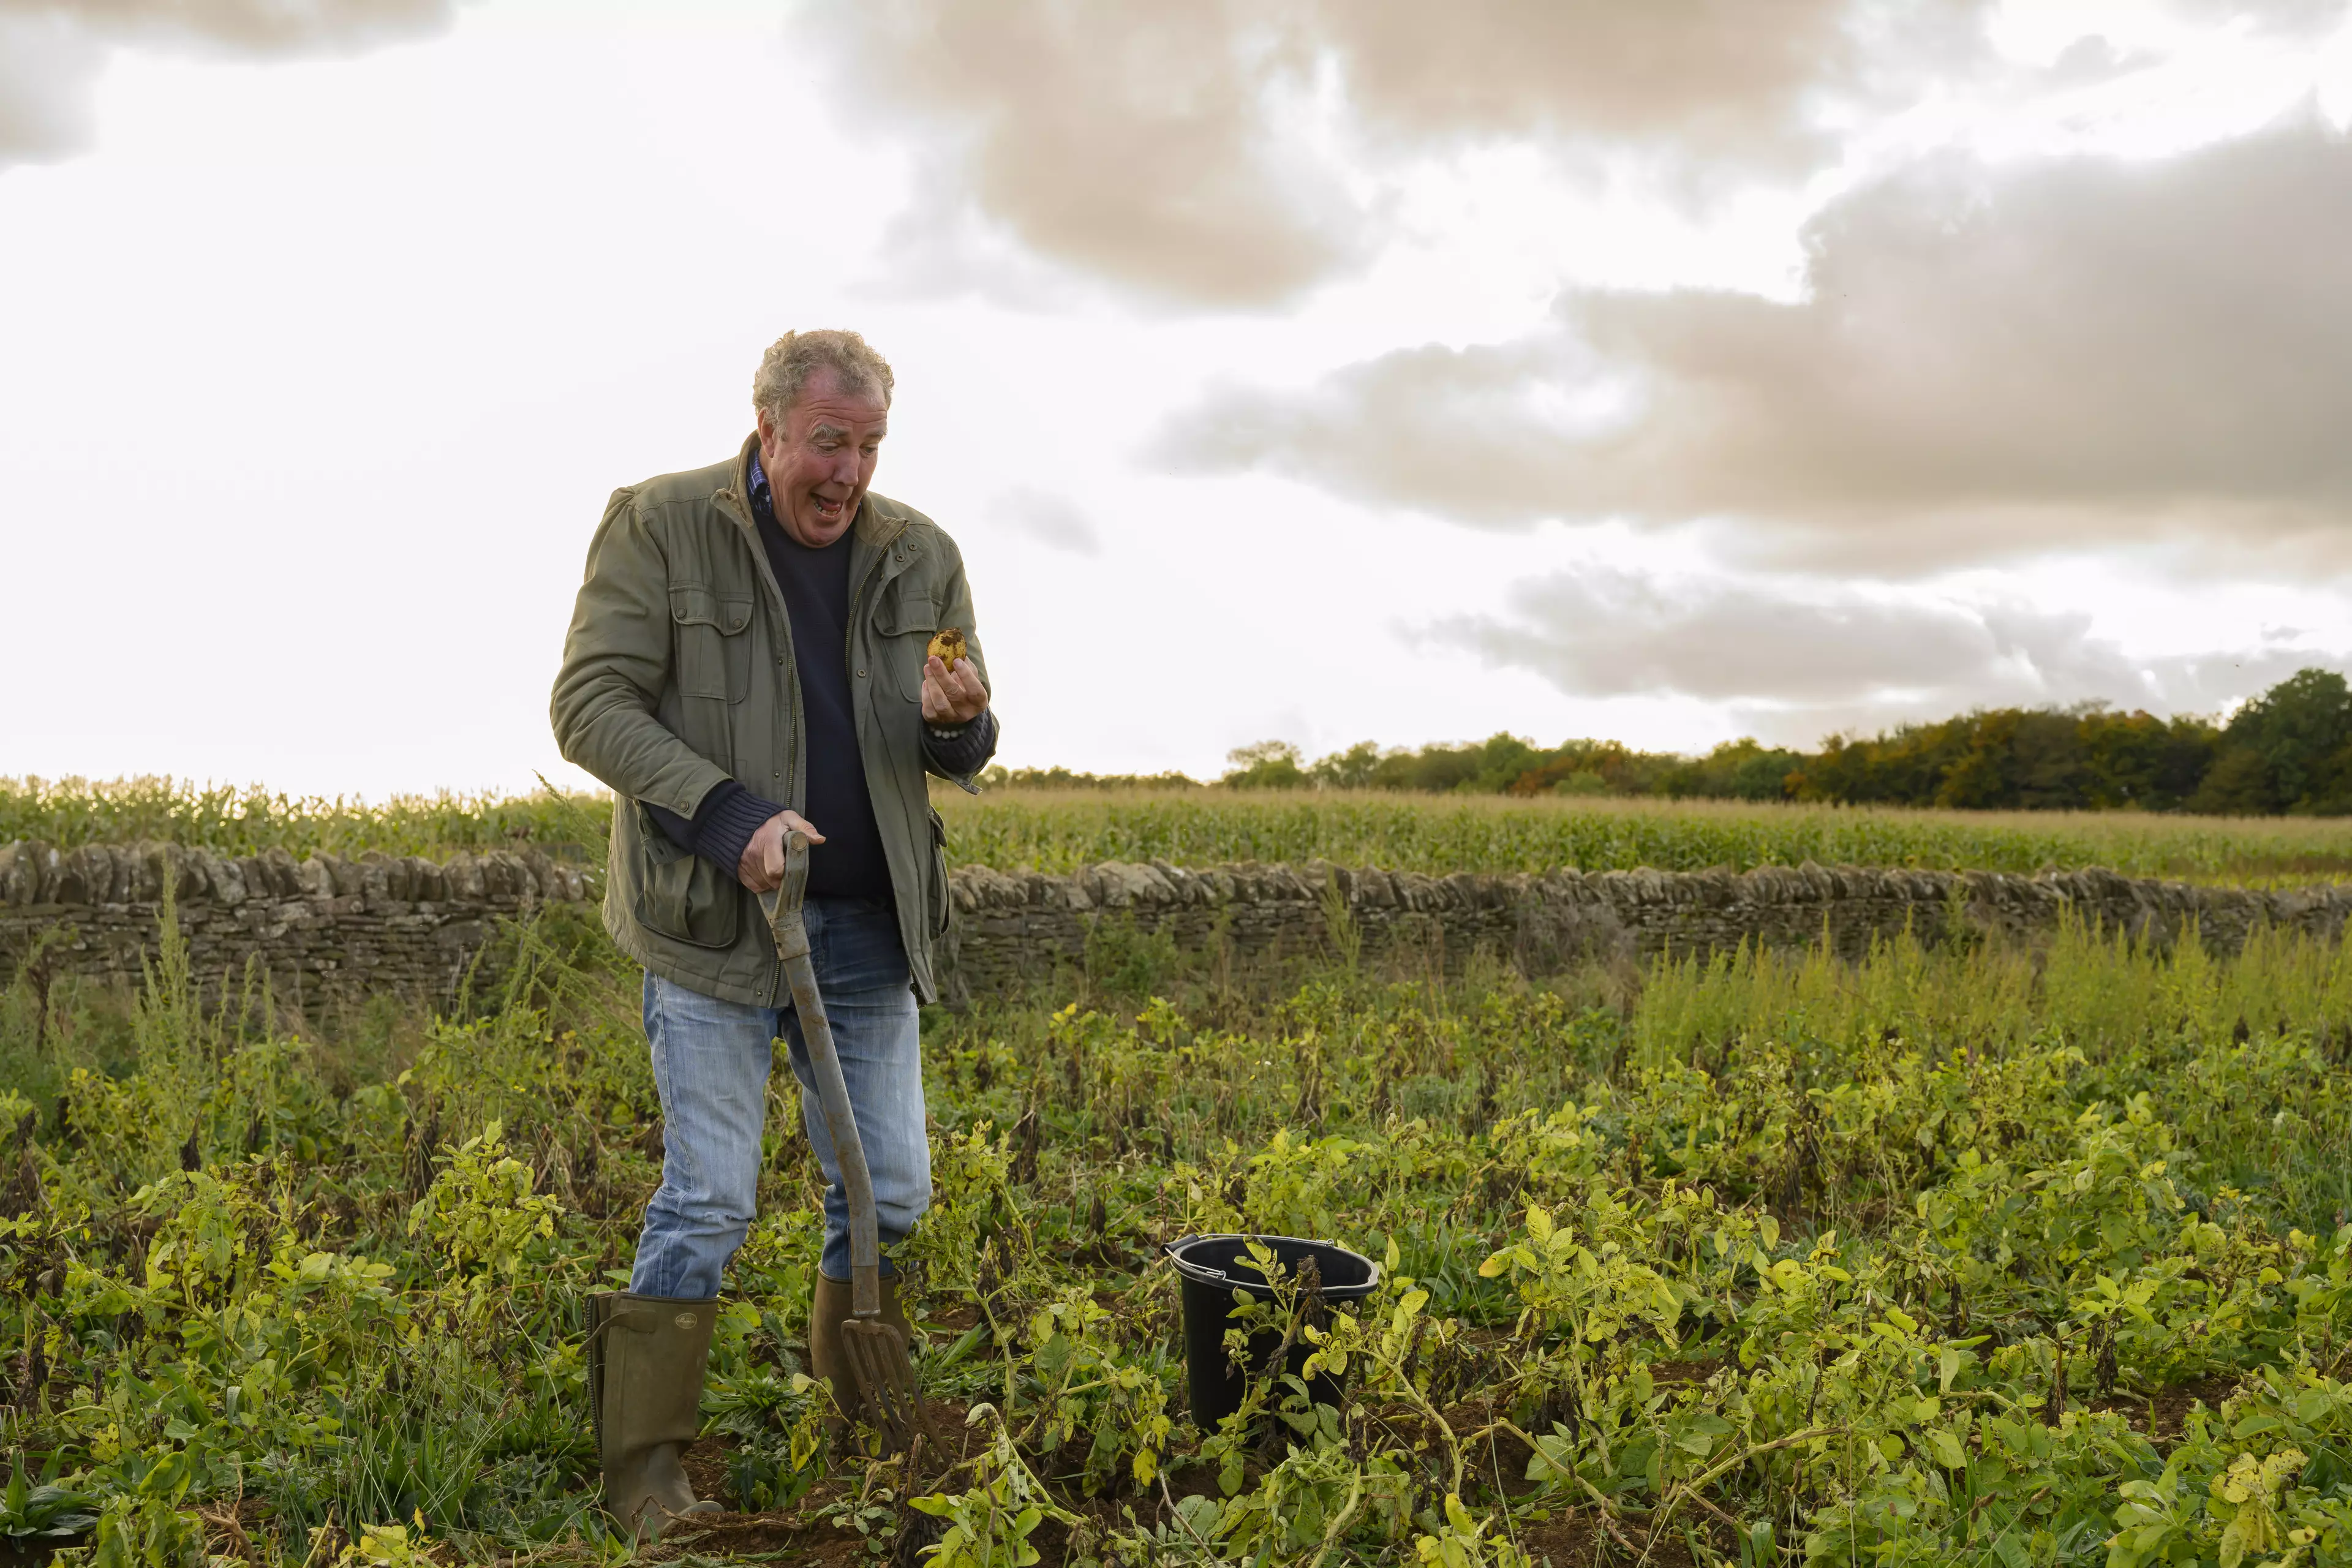 Clarkson wants to make another series of Clarkson's Farm.